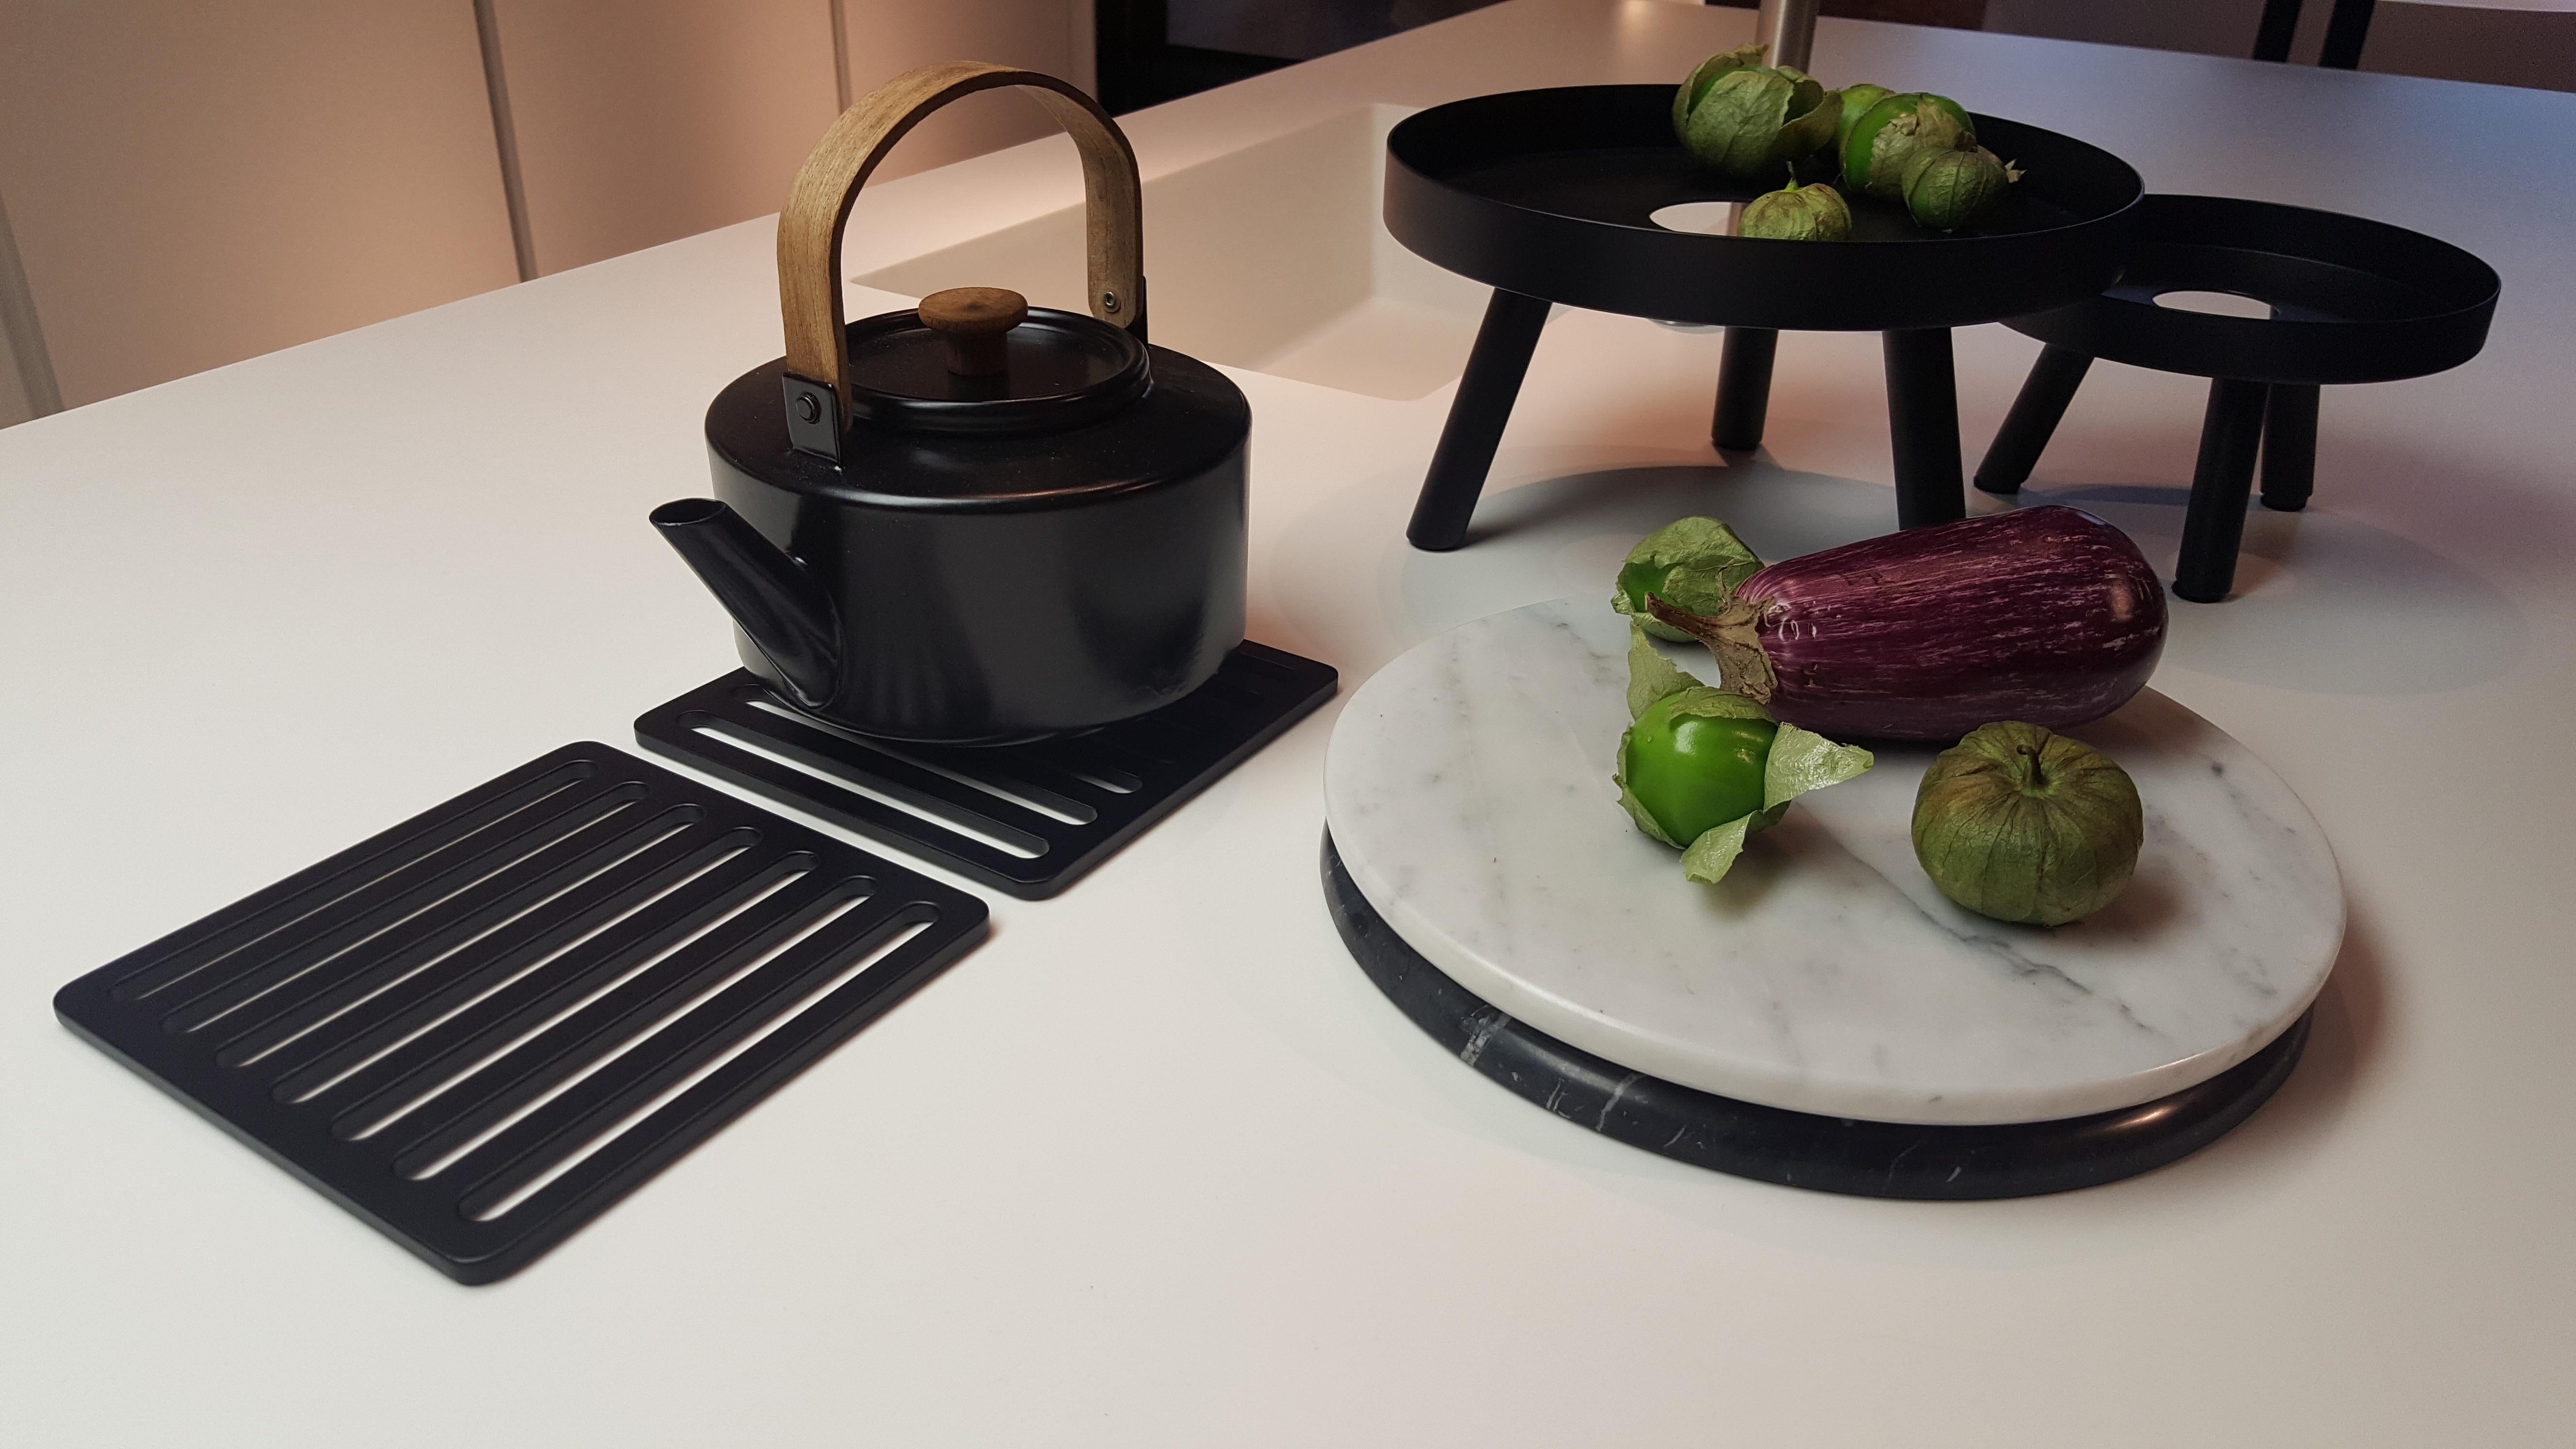 Inspired by the sidewalk grates in Milan, the Milan Trivet is a piece of Italy at home. Functional as a pedestal for your serving dishes, and uniquely appealing as a piece of decor for a modern curated kitchen.

Material: Anodized aluminum / solid